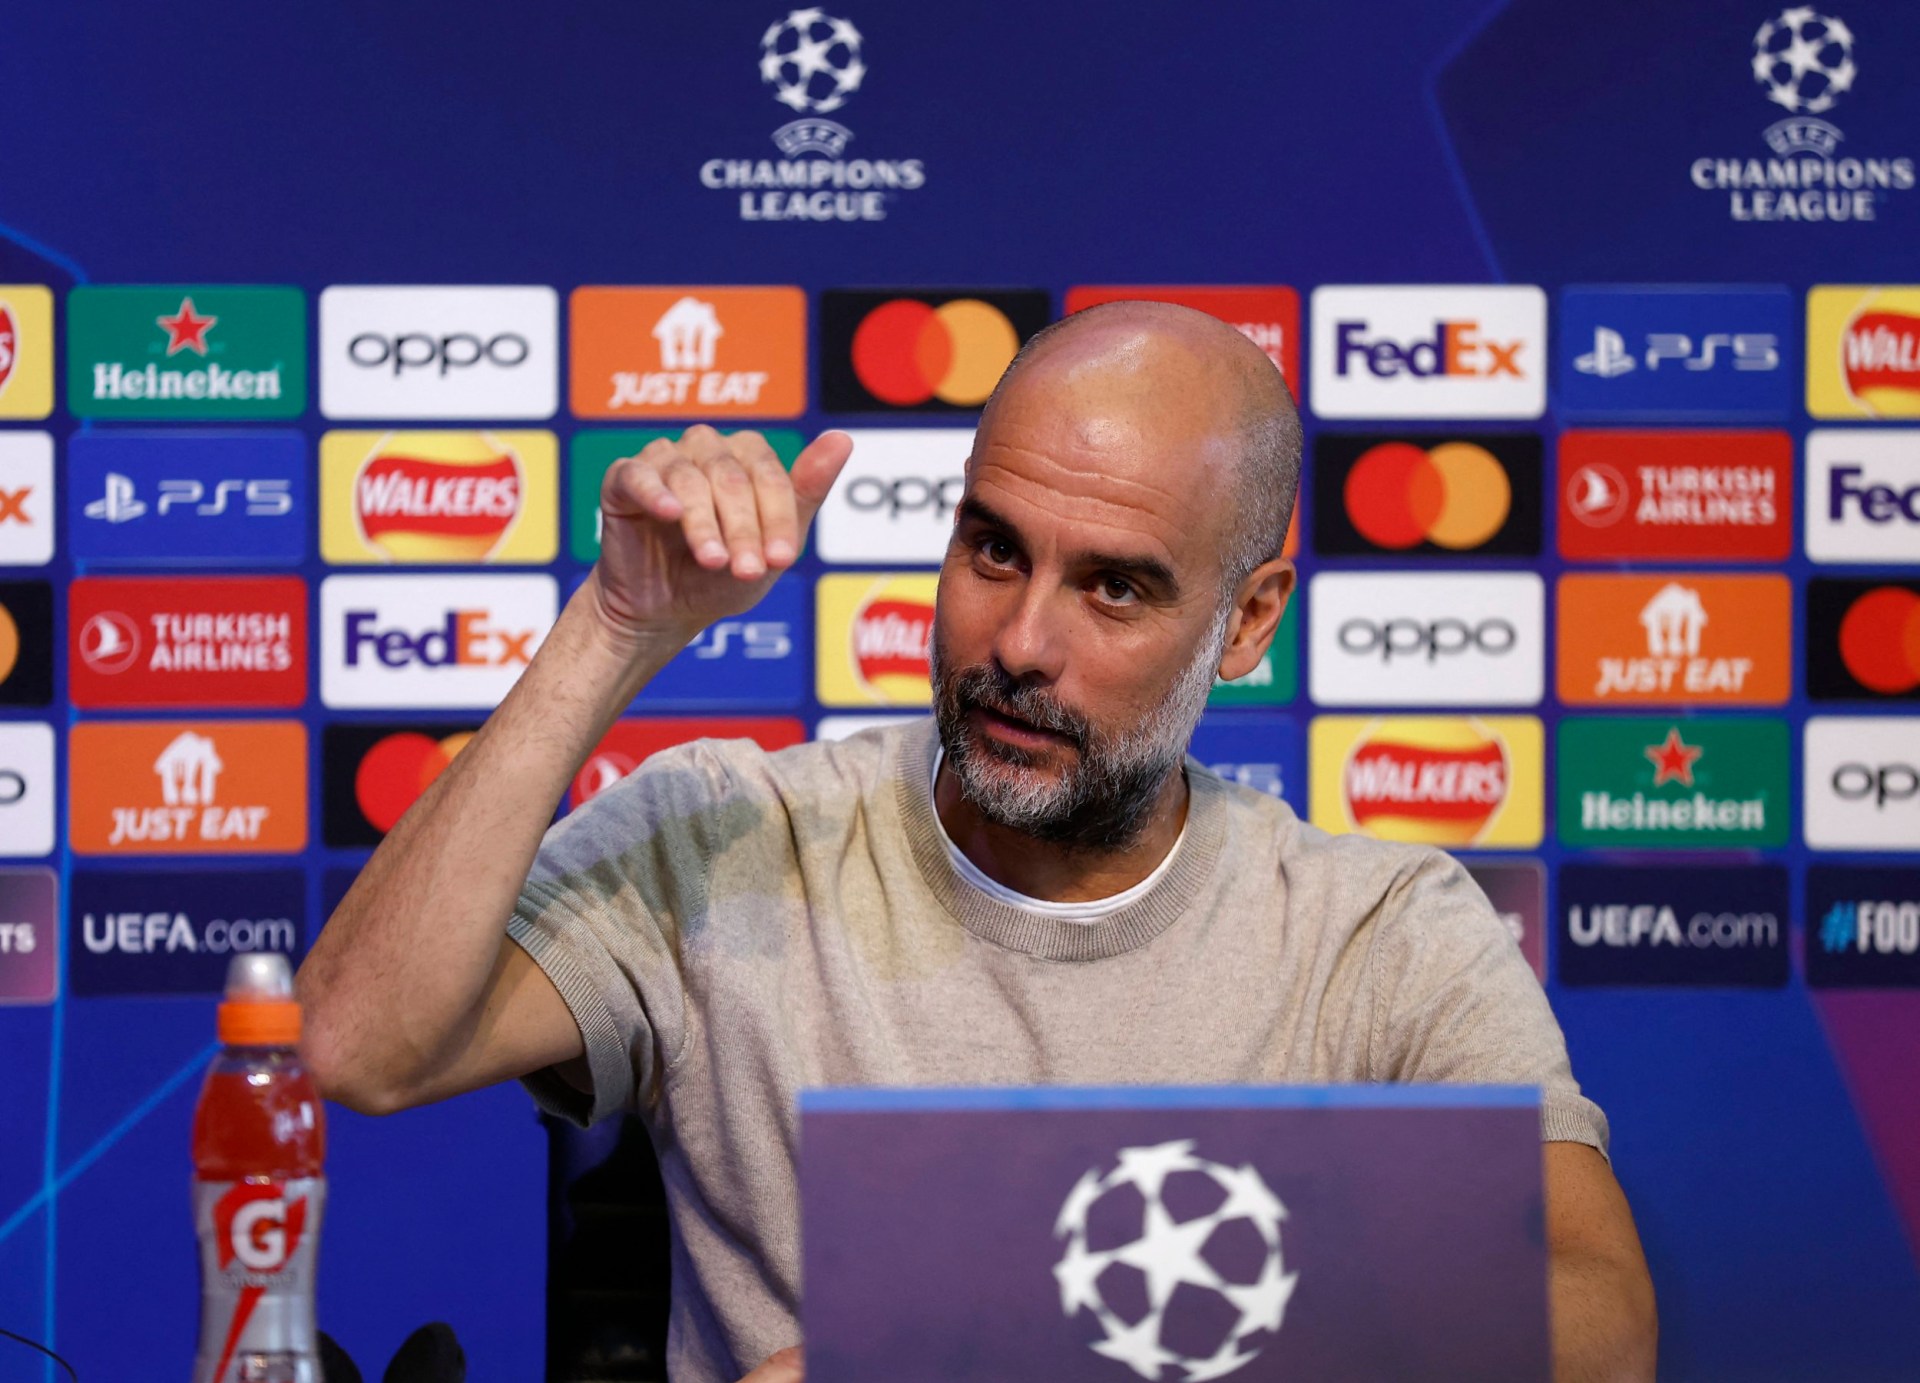 pep guardiola responds to man utd and chelsea's poor start in the premier league